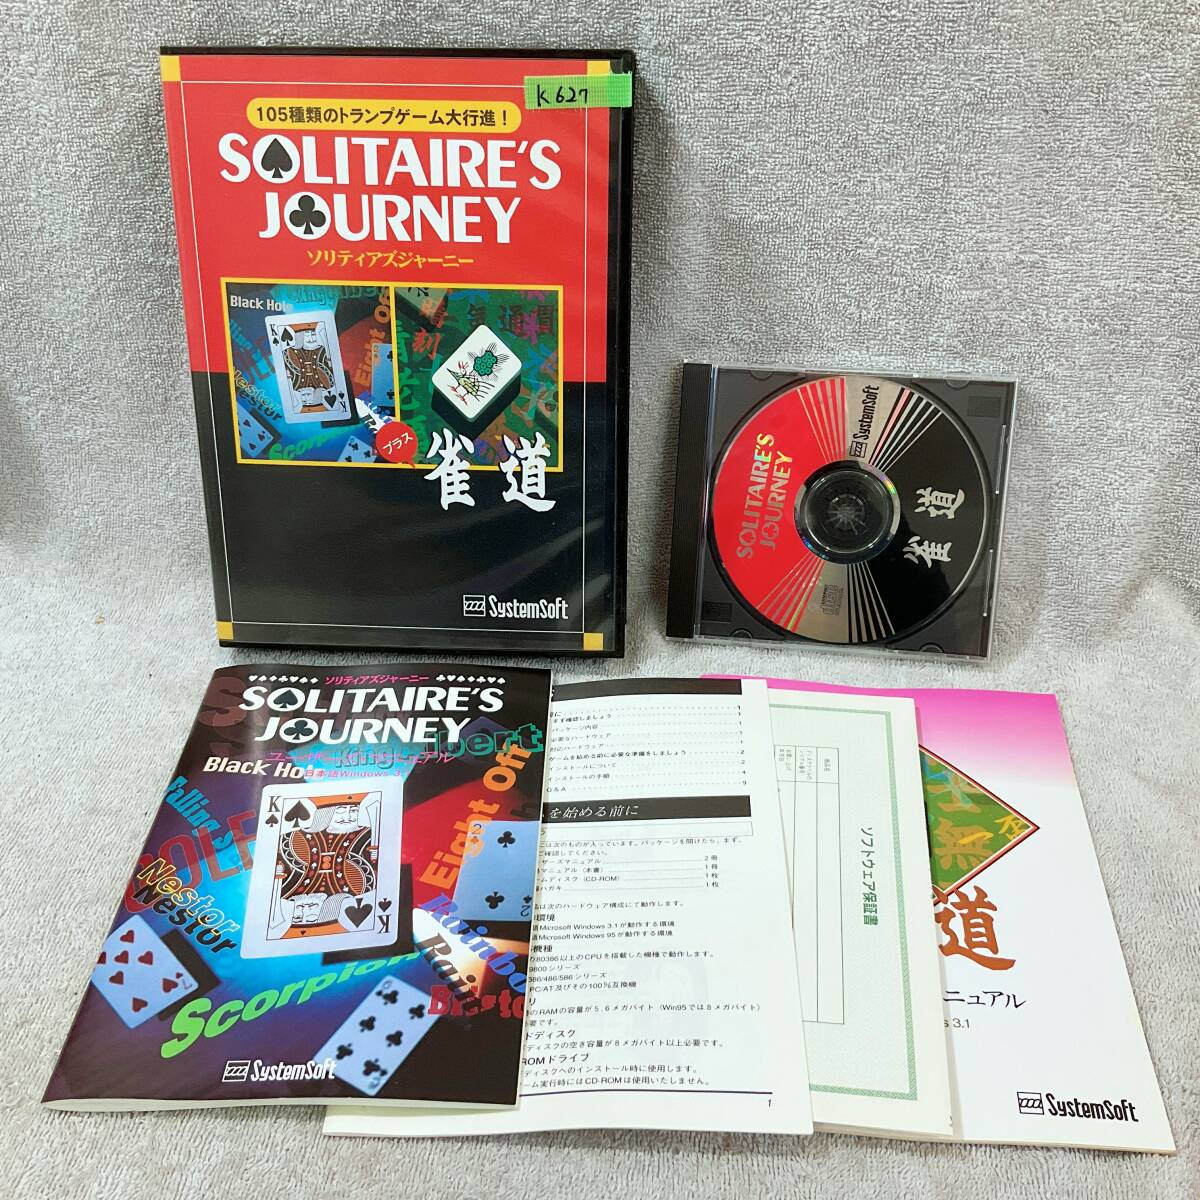 ●K627■Windows 95/3.1■SOLITAIRES JOURNEY ソリティアズジャーニー■SystemＳoft■長期保存品■現状品■中古_画像1